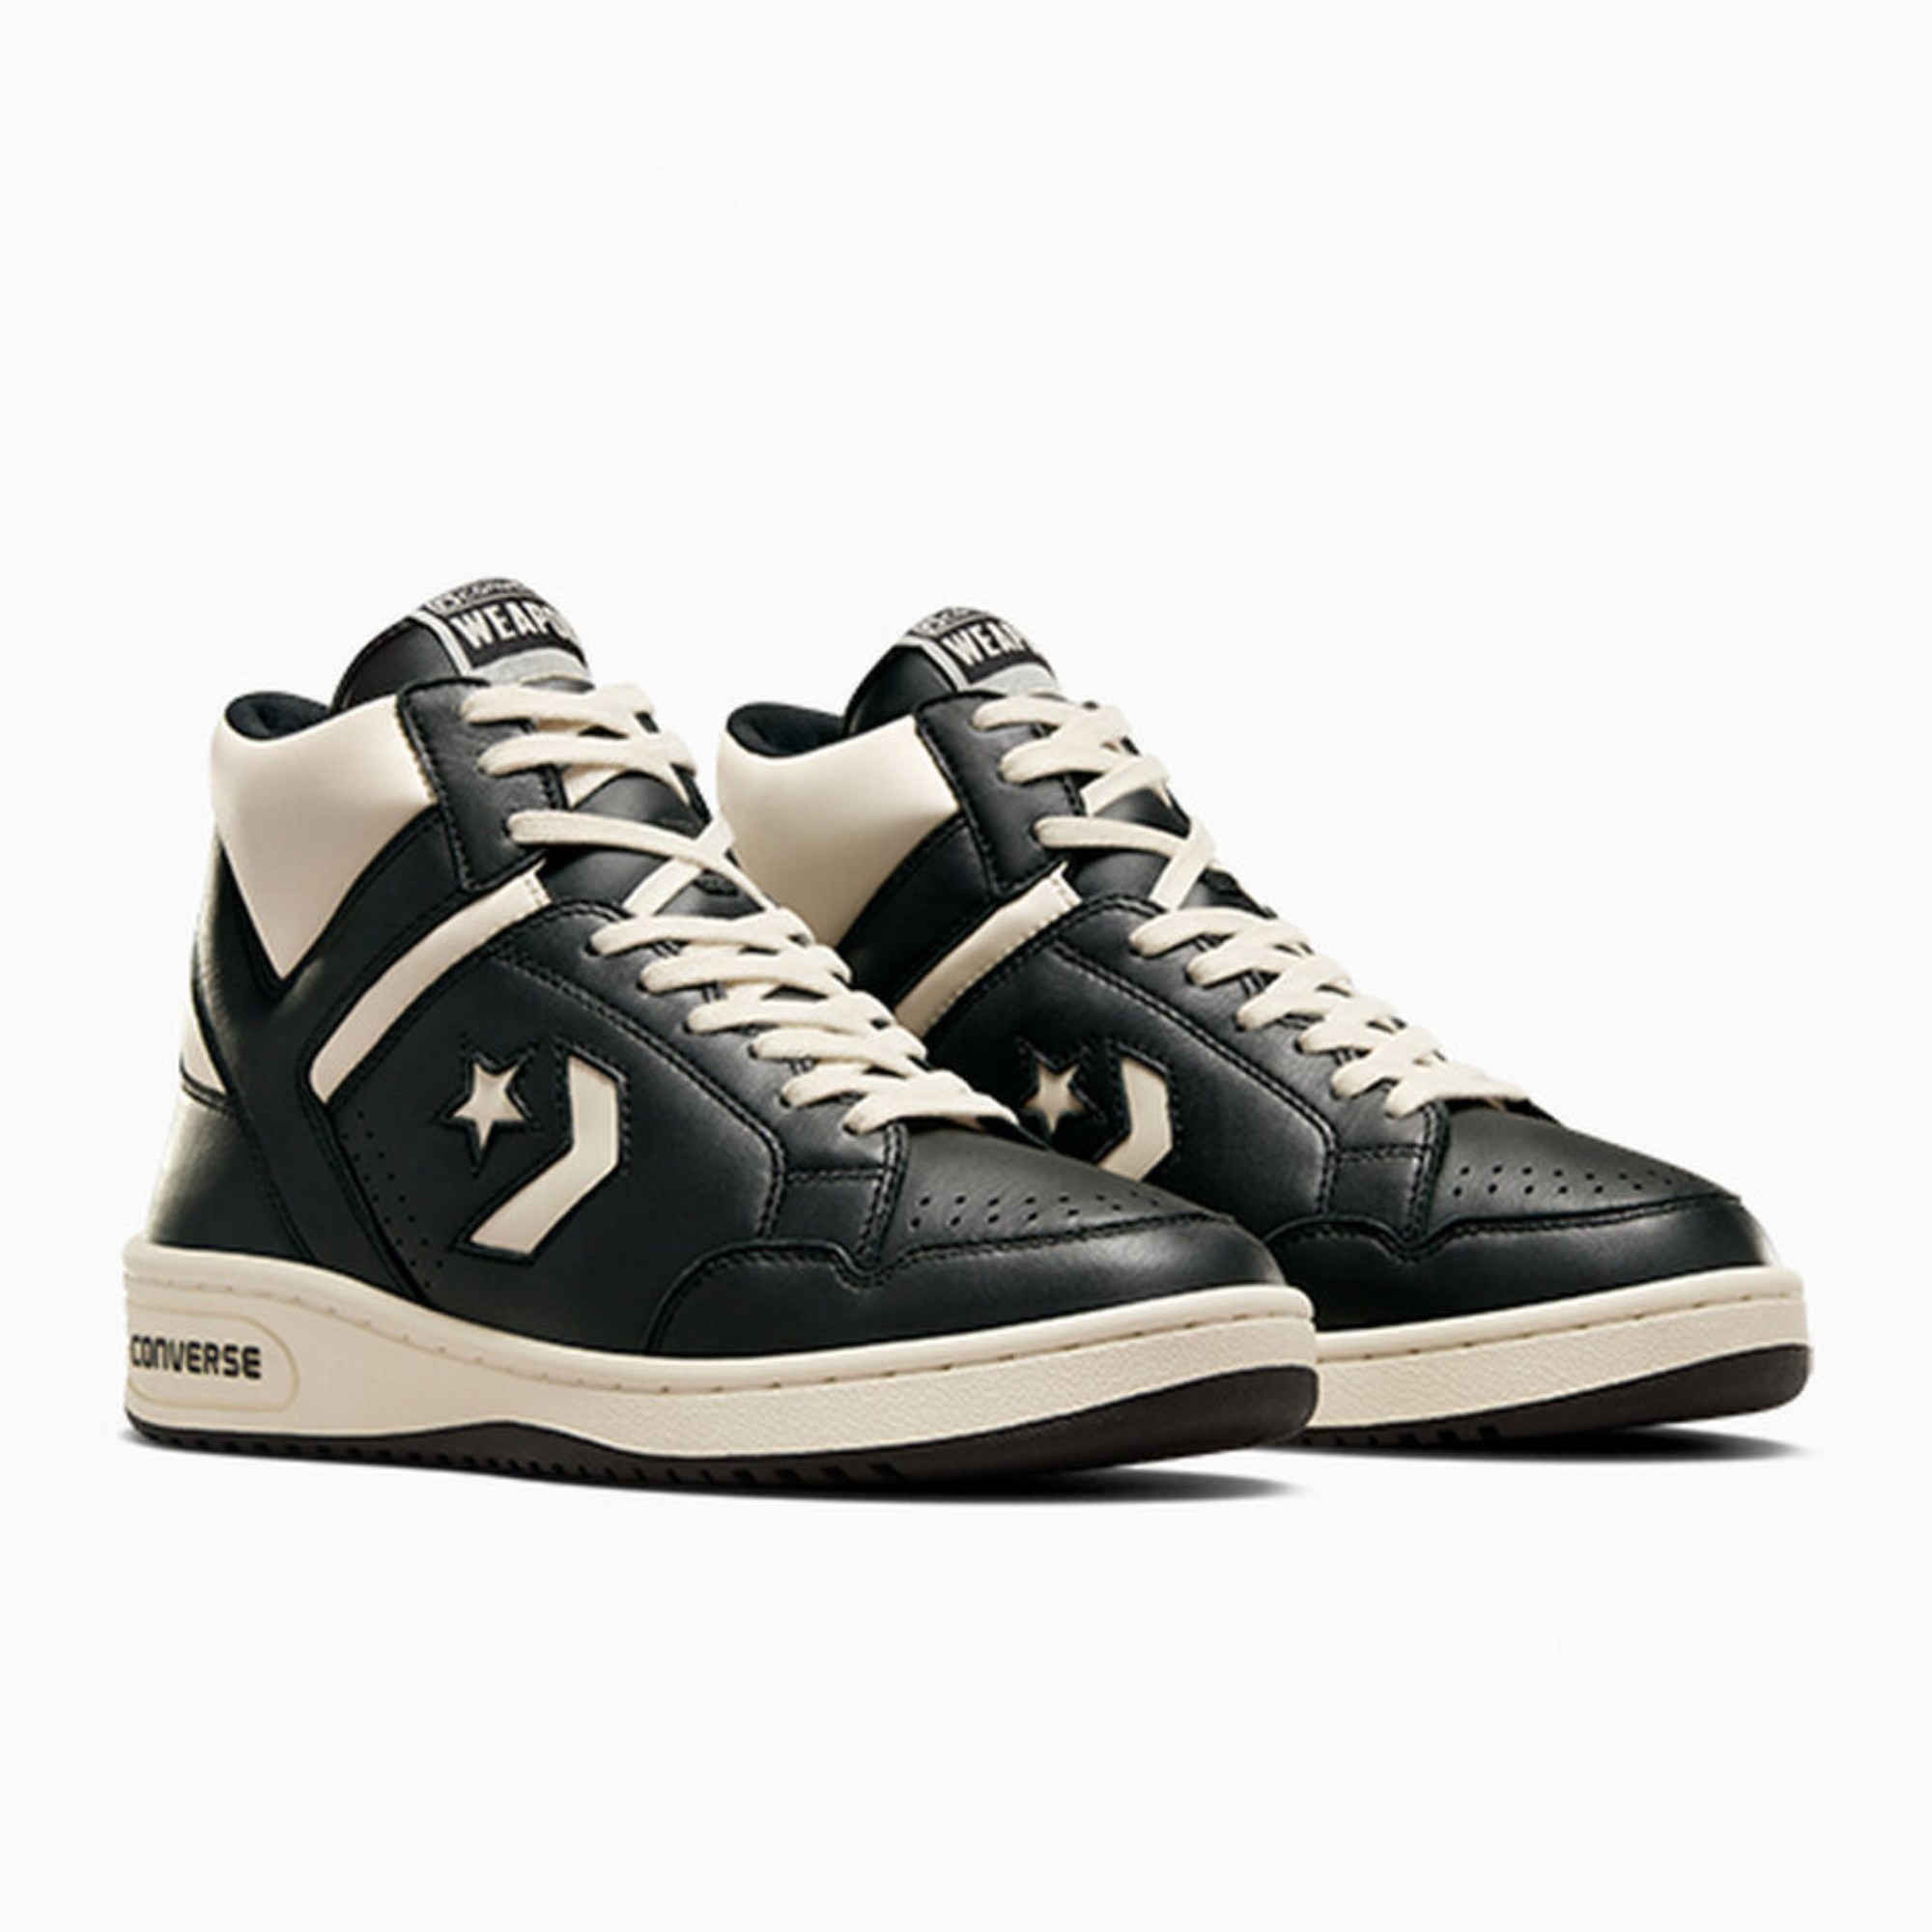 Converse Weapon Mid Black Natural